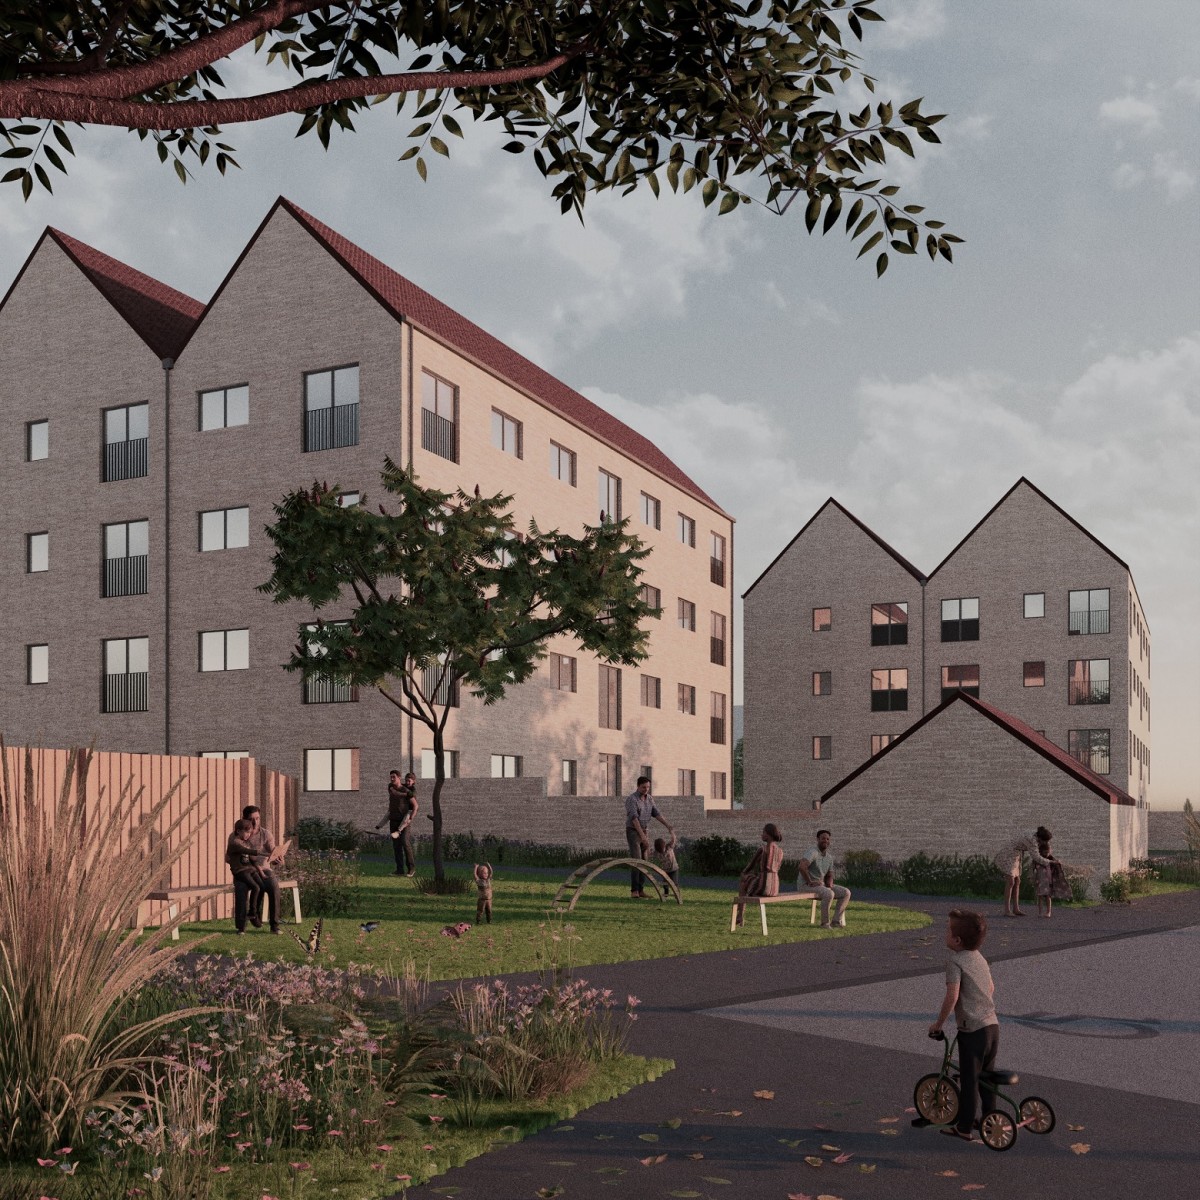 Wheatley Homes Glasgow given approval for 48 for mid-market rent homes